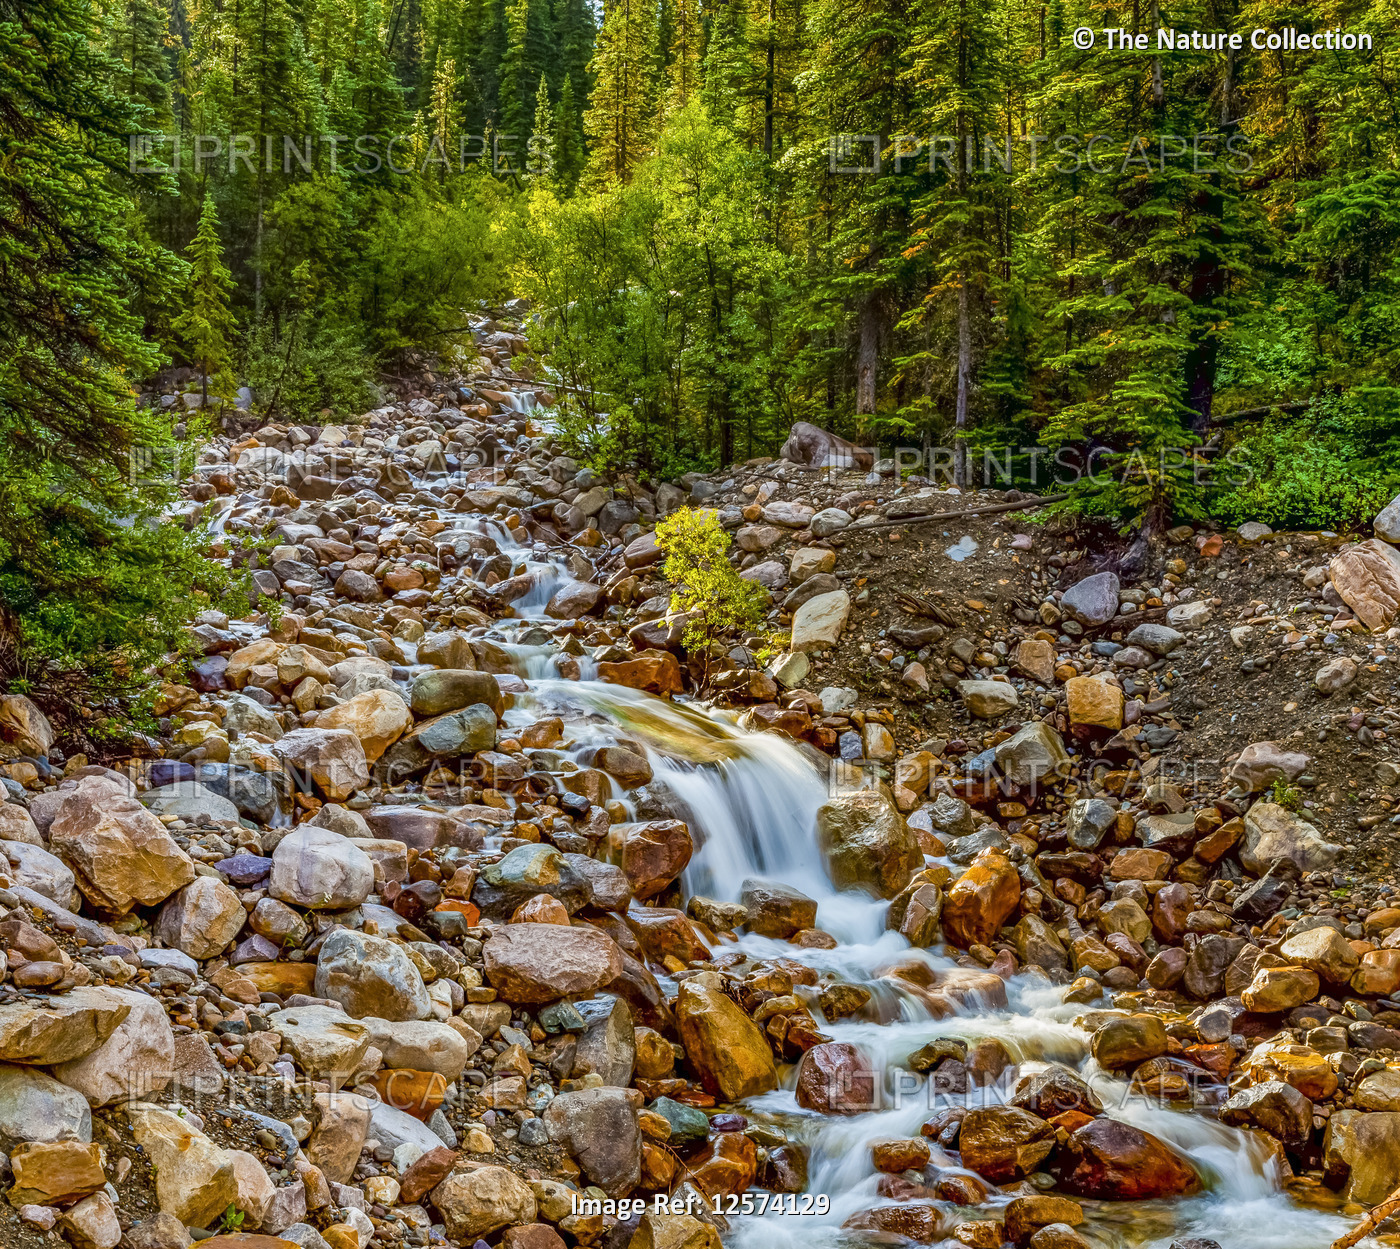 Stream flowing over rocks in a forest; Alberta, Canada